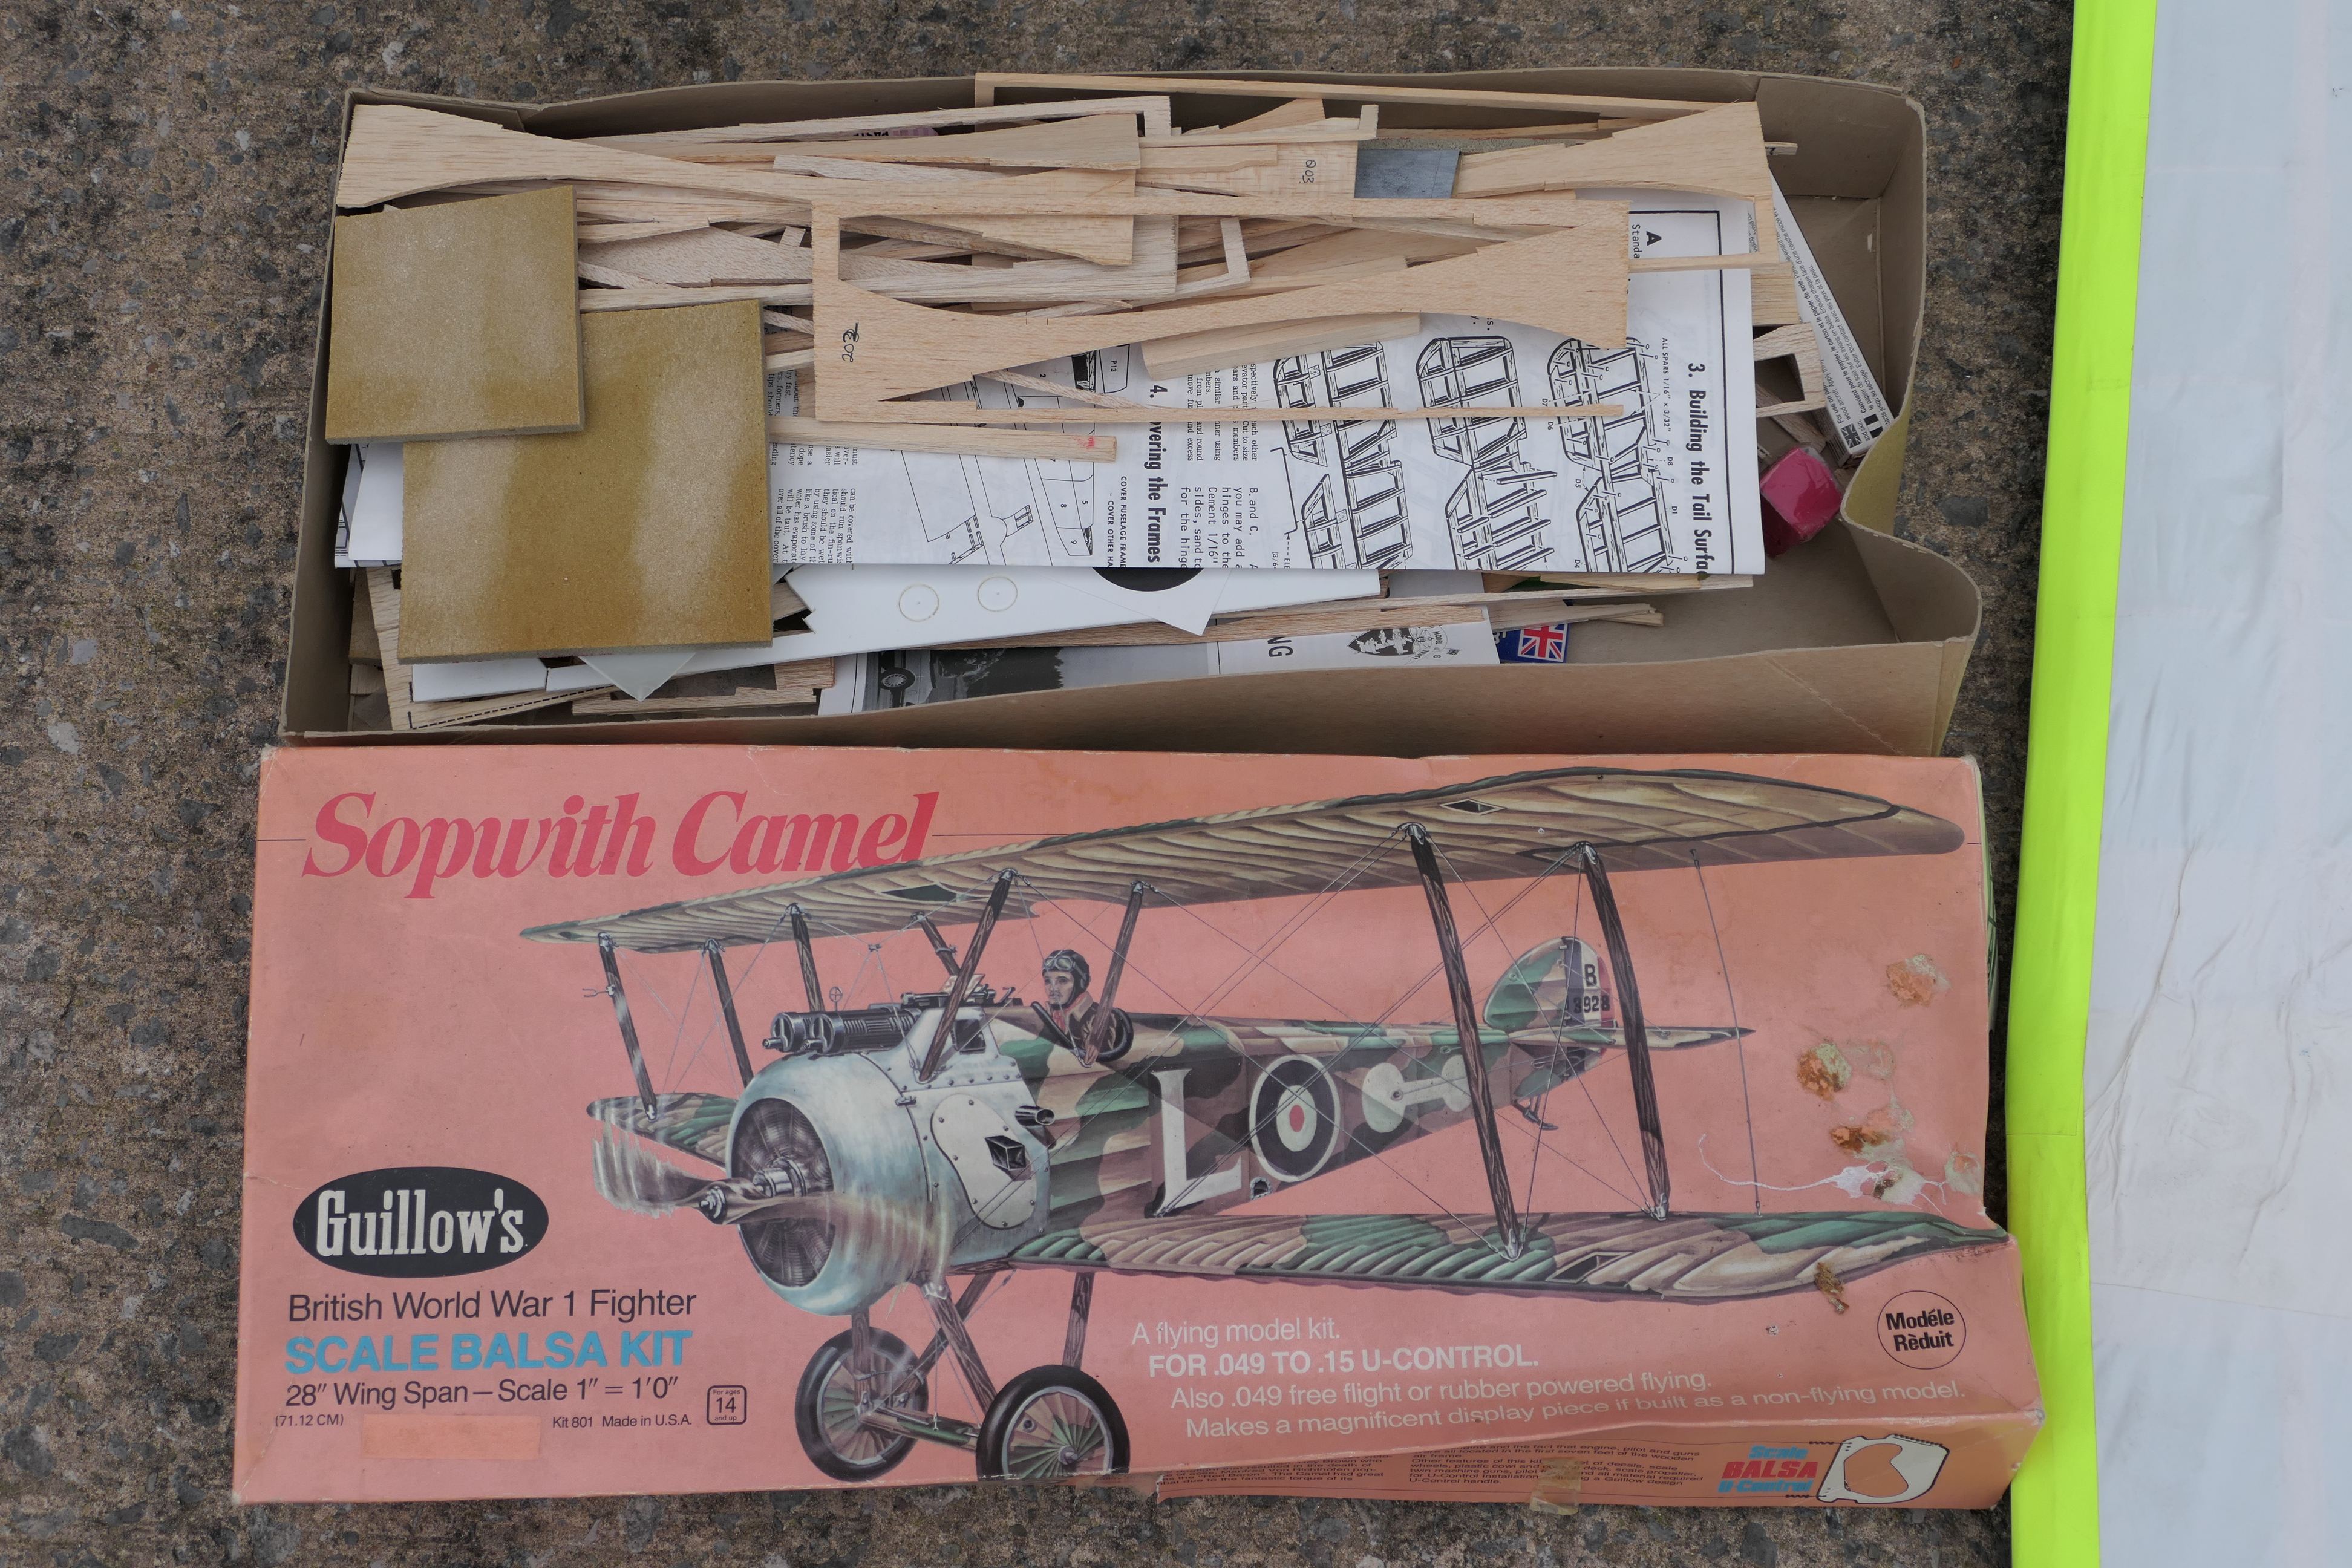 Dynaflite, Guillow's - A part built wooden Dynaflite 'Cessna Trainer' aircraft model. - Image 5 of 6